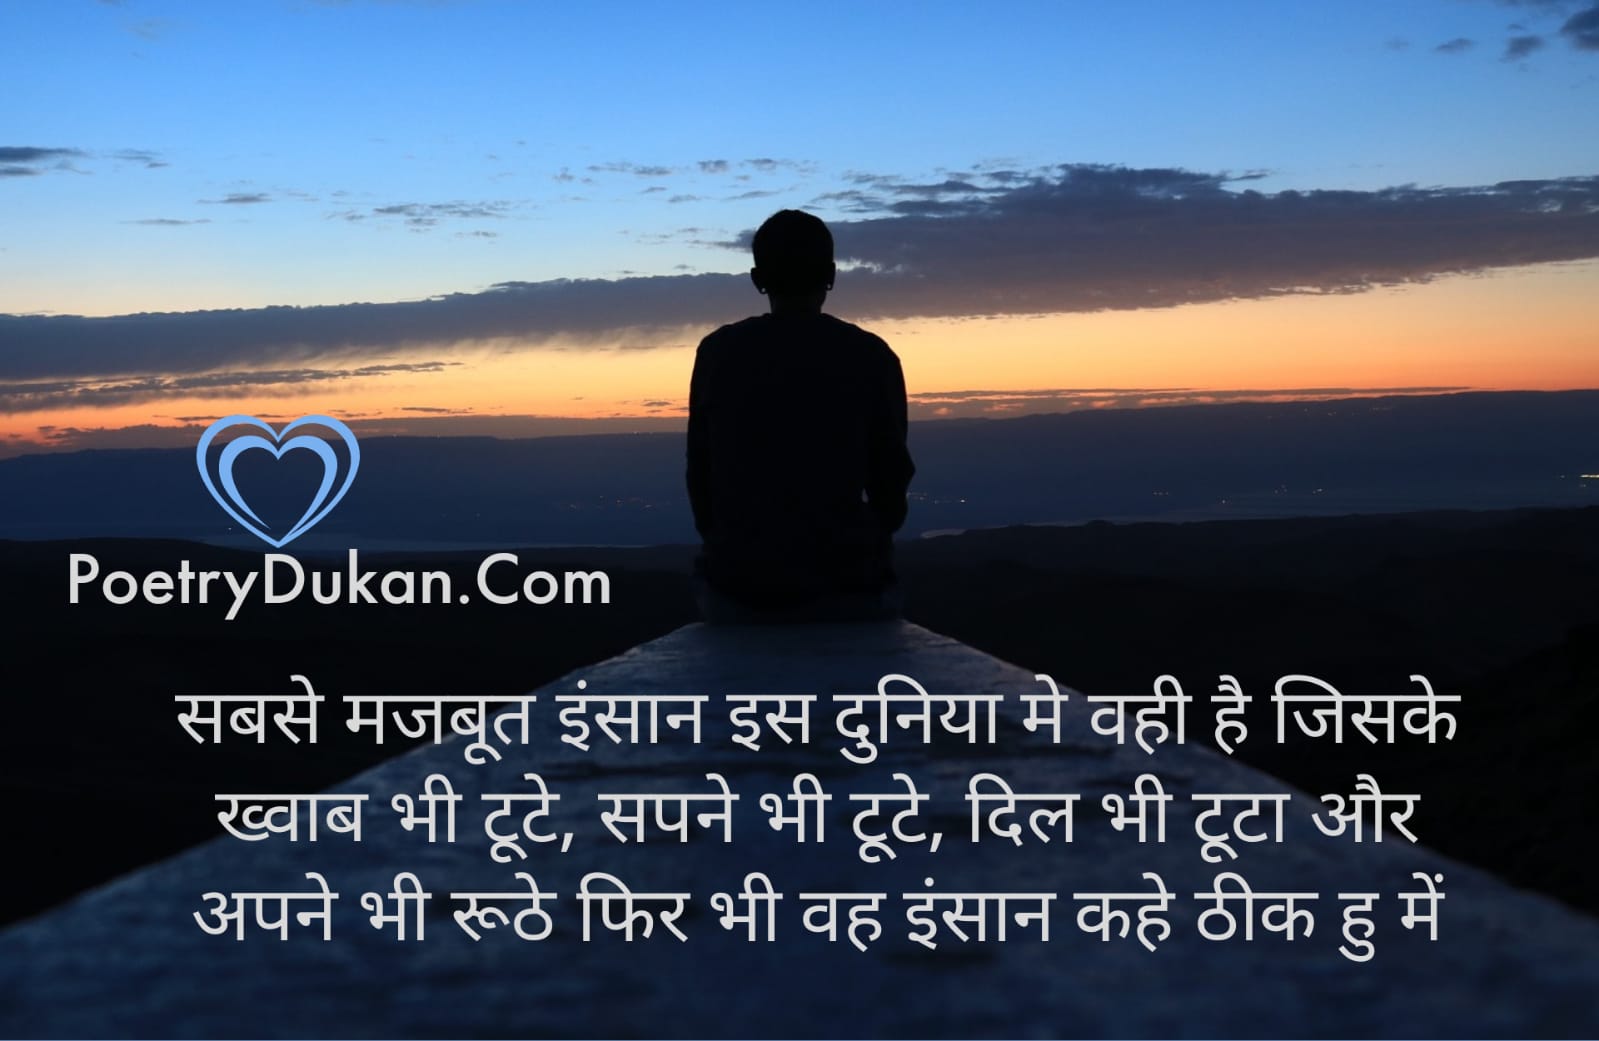 Quotes On Life In Hindi | Life Quotes In Hindi | Life Quotes | True Life Quotes